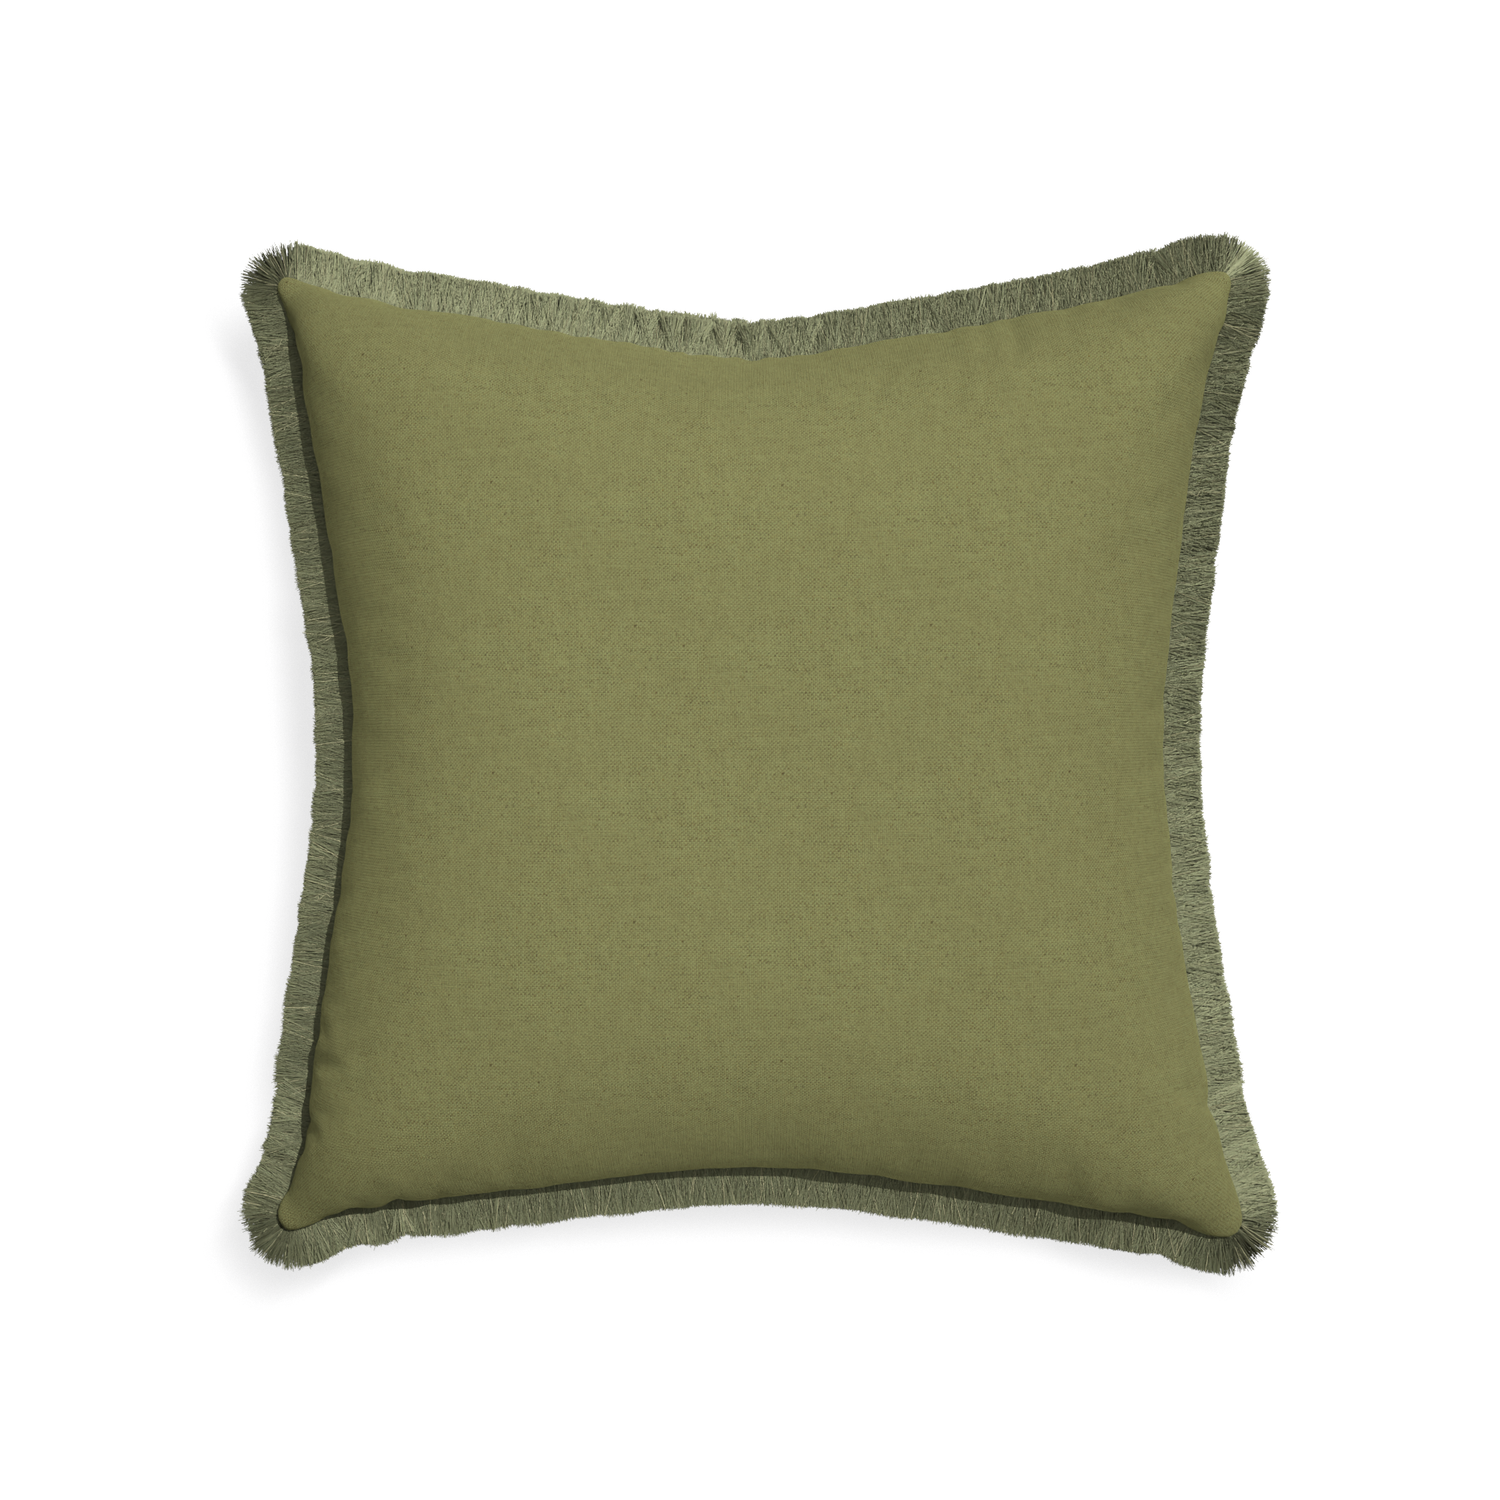 22-square moss custom moss greenpillow with sage fringe on white background